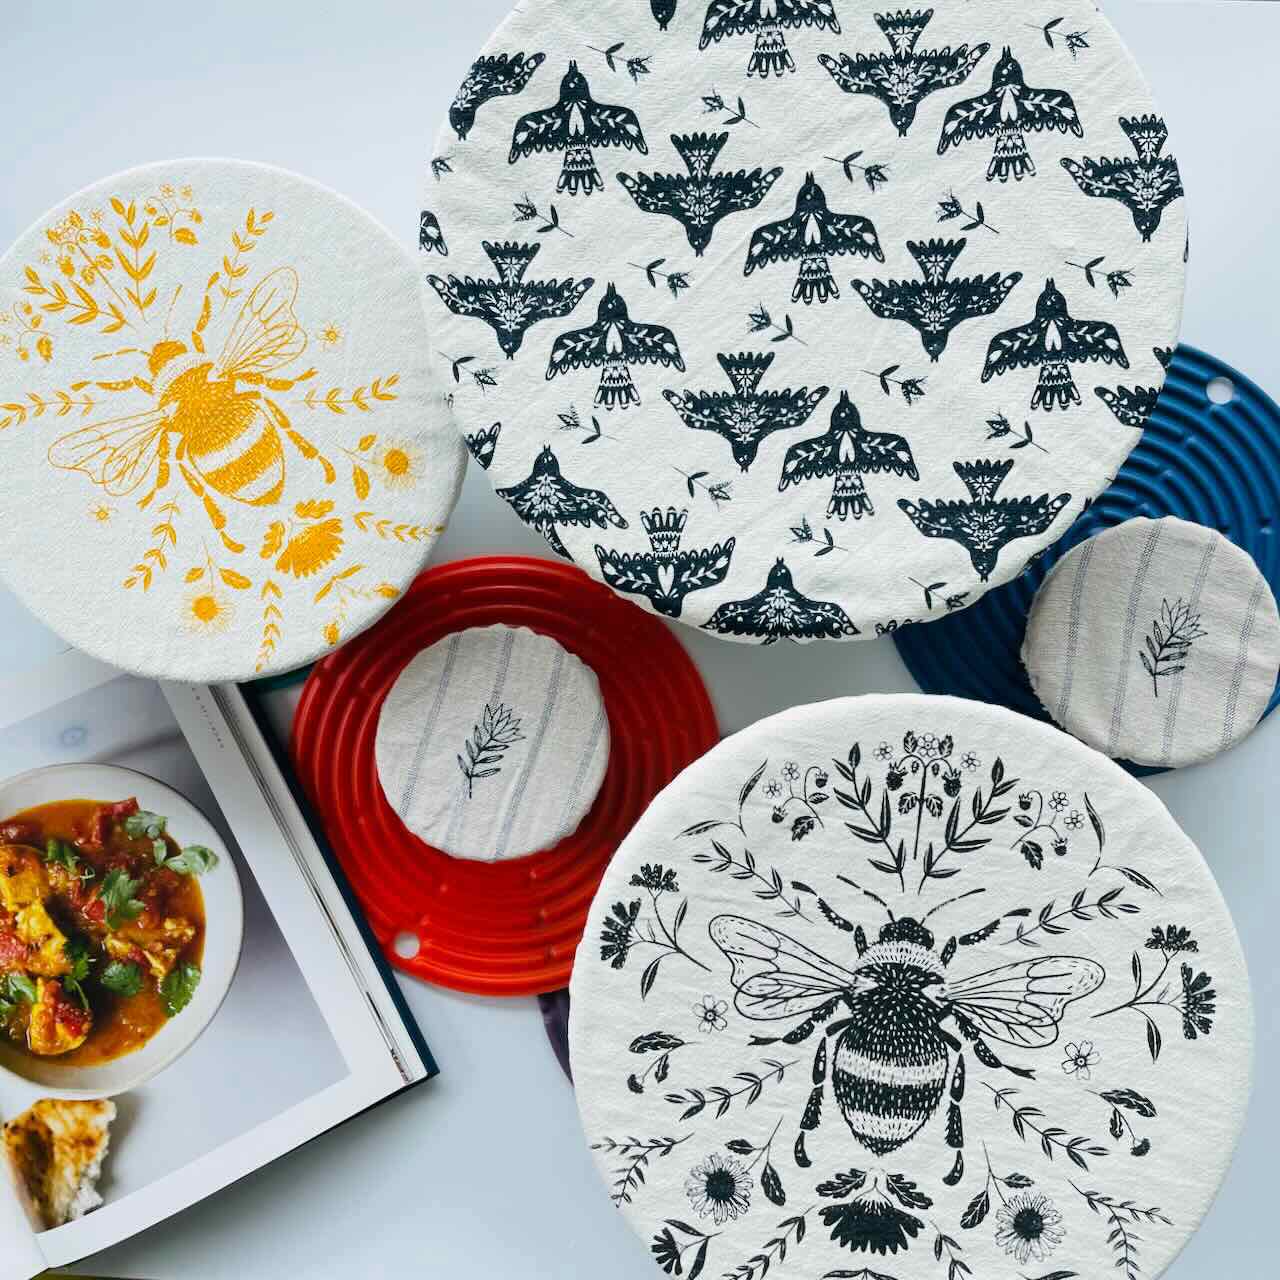 A selection of fabric bowl covers on a white counter top.